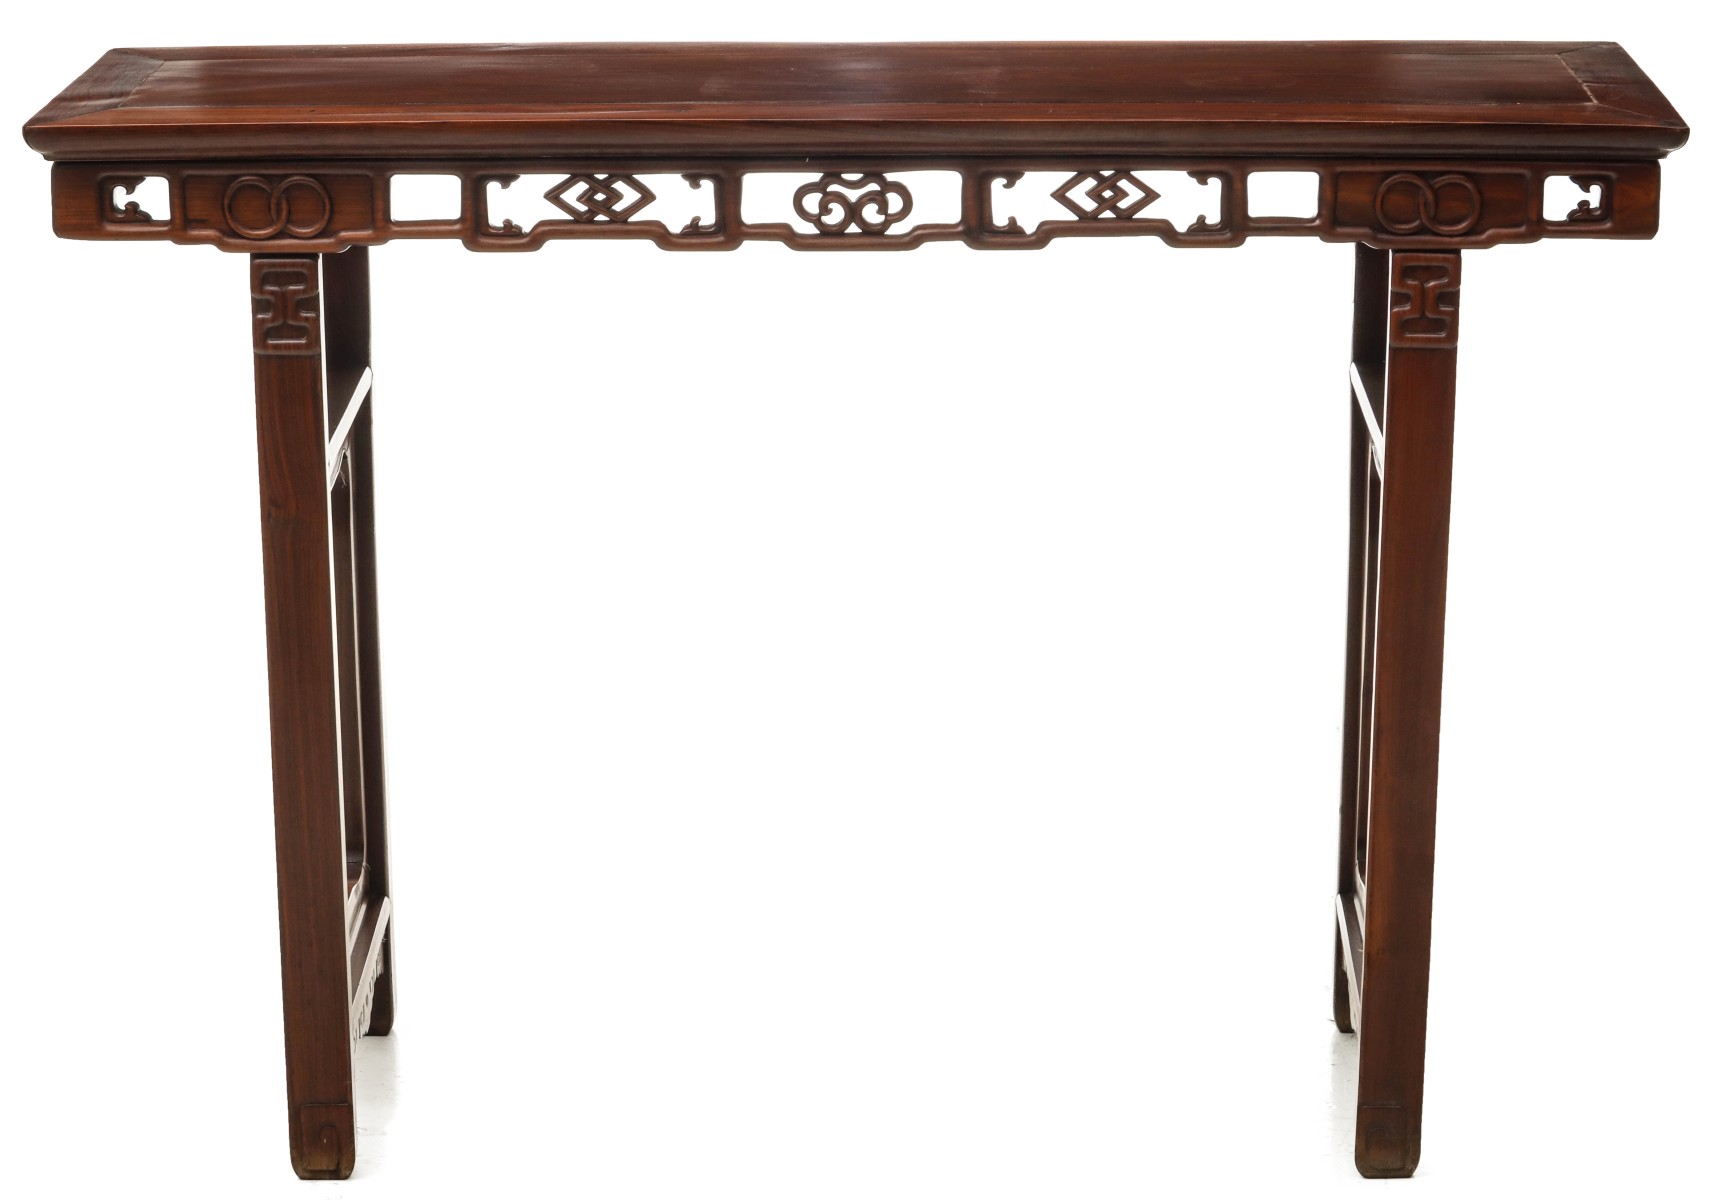 AN EARLY TO MID 20TH C. CHINESE HARDWOOD ALTAR TABLE